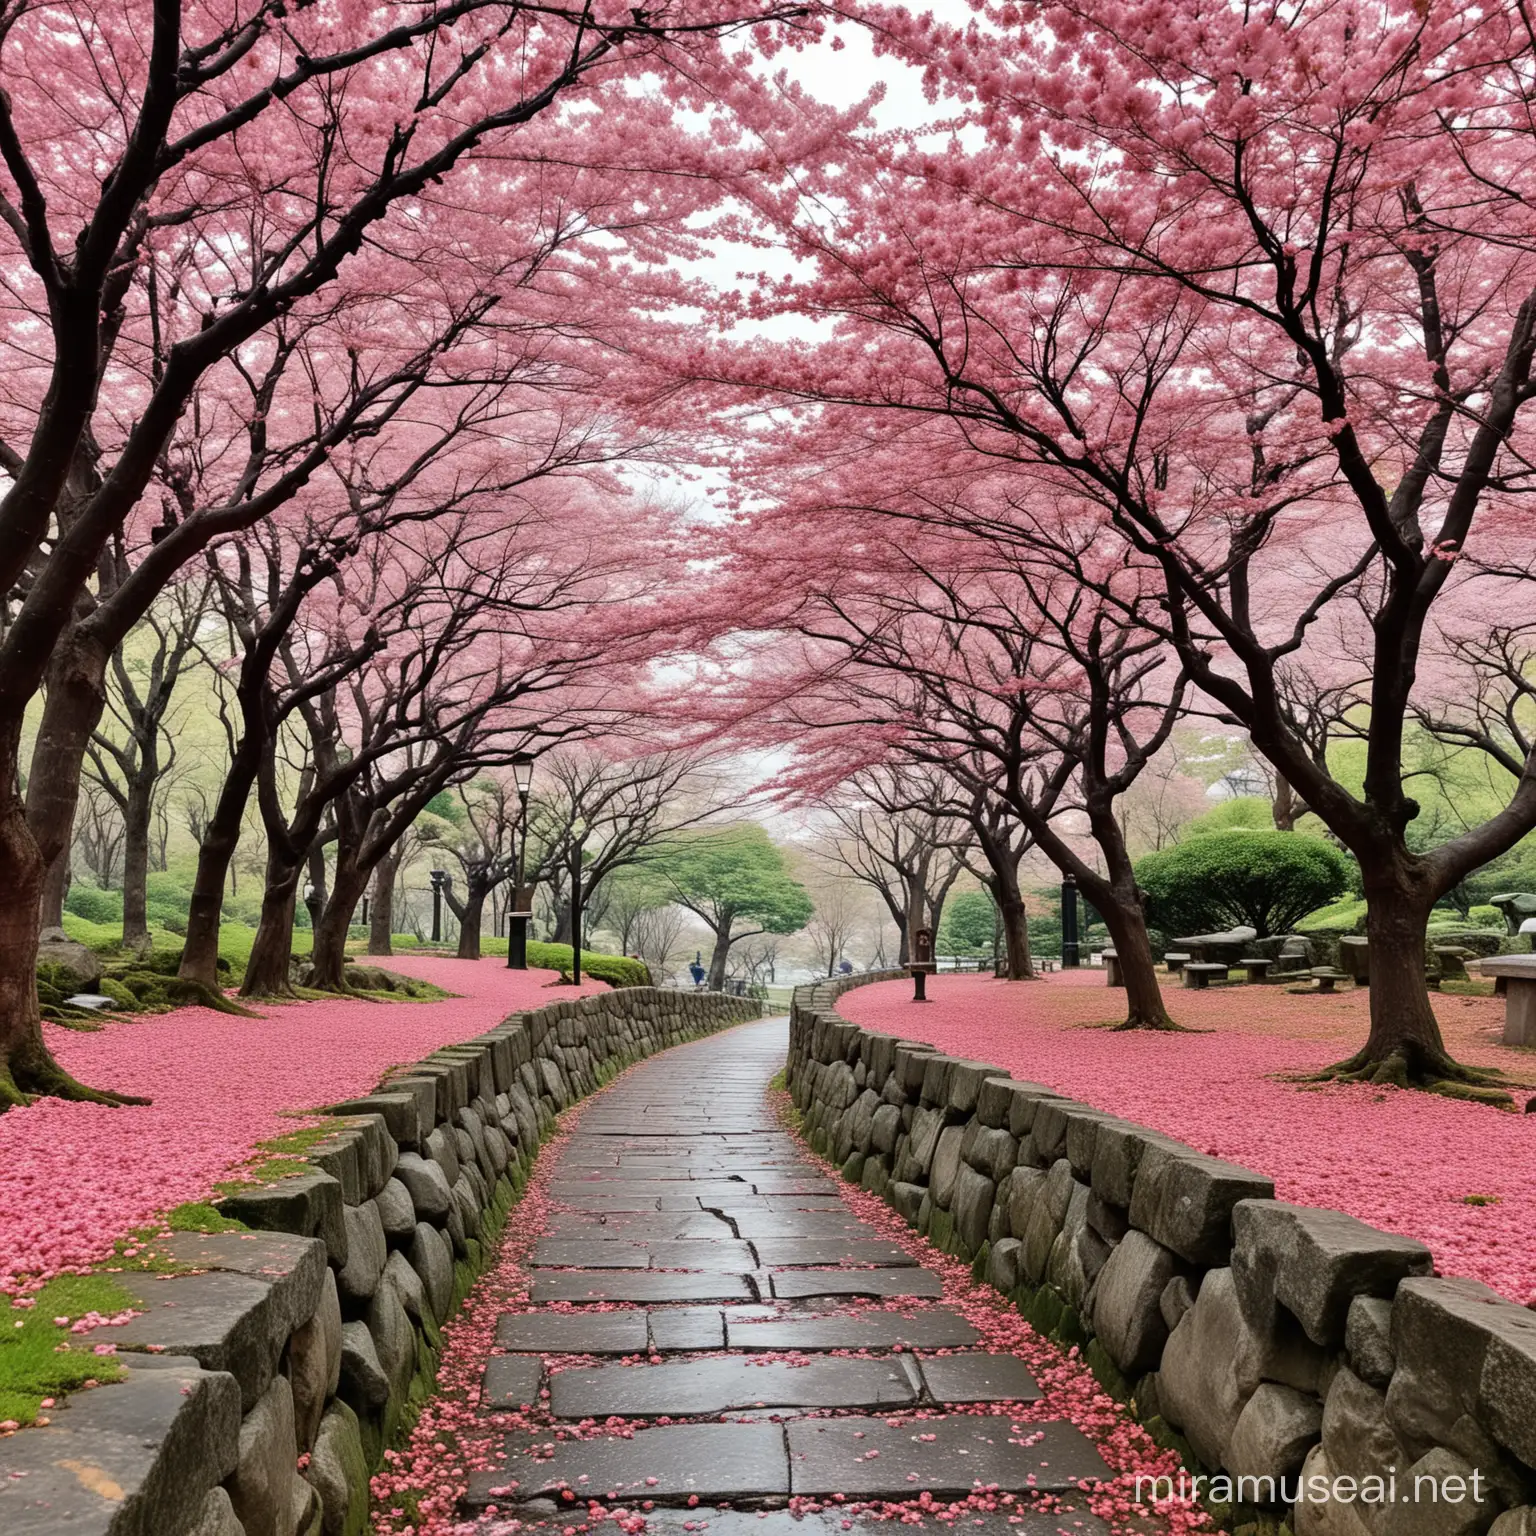 Scenic Cherry Blossom Park in Japan Raining Pink Leaves Amidst Greenery